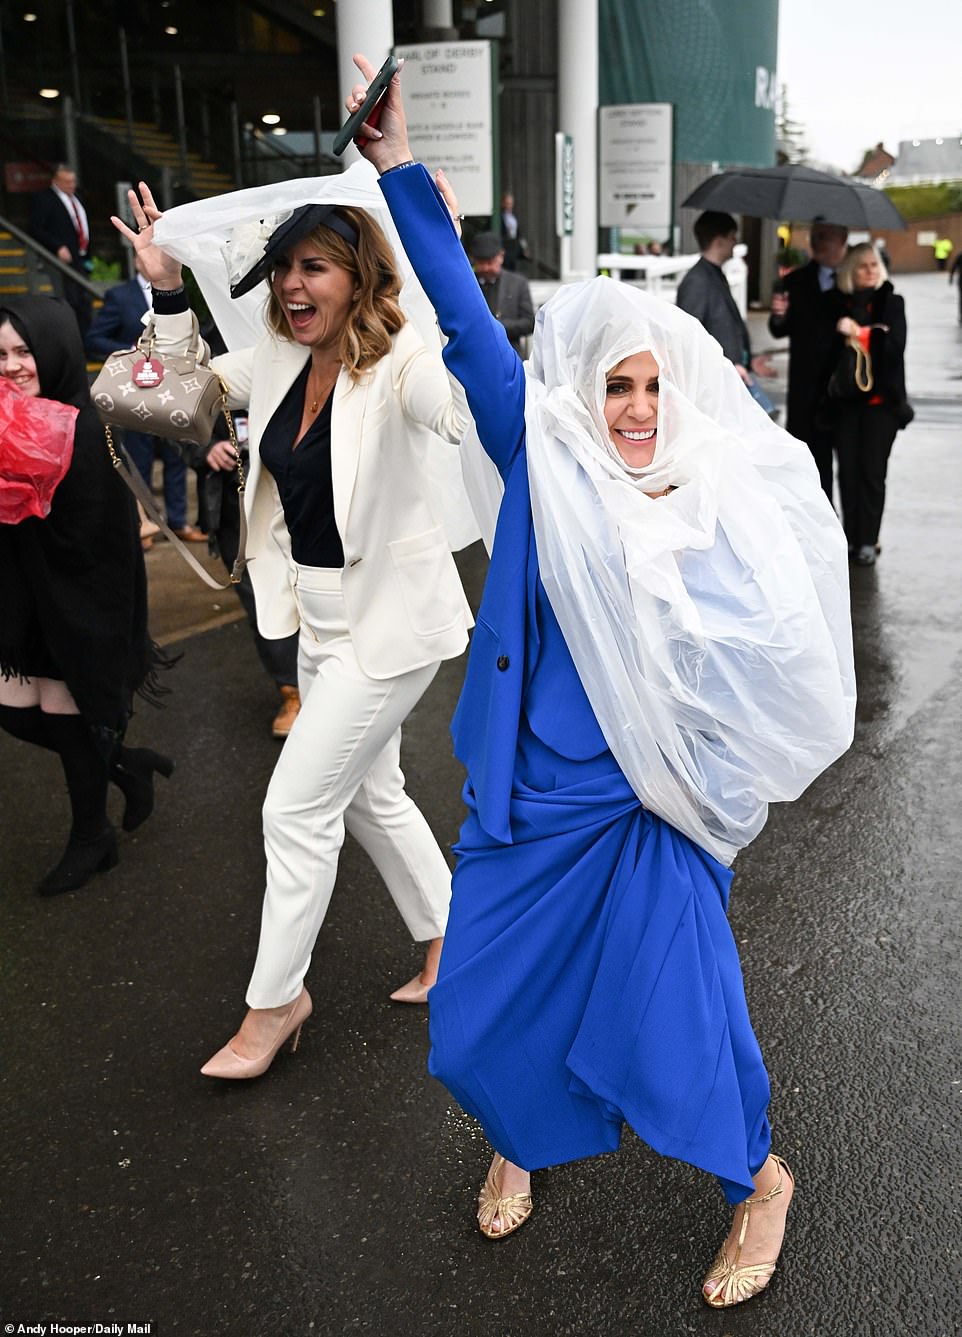 Aintree is all about fashion, but when it rains, style sometimes has to take a backseat to staying dry!